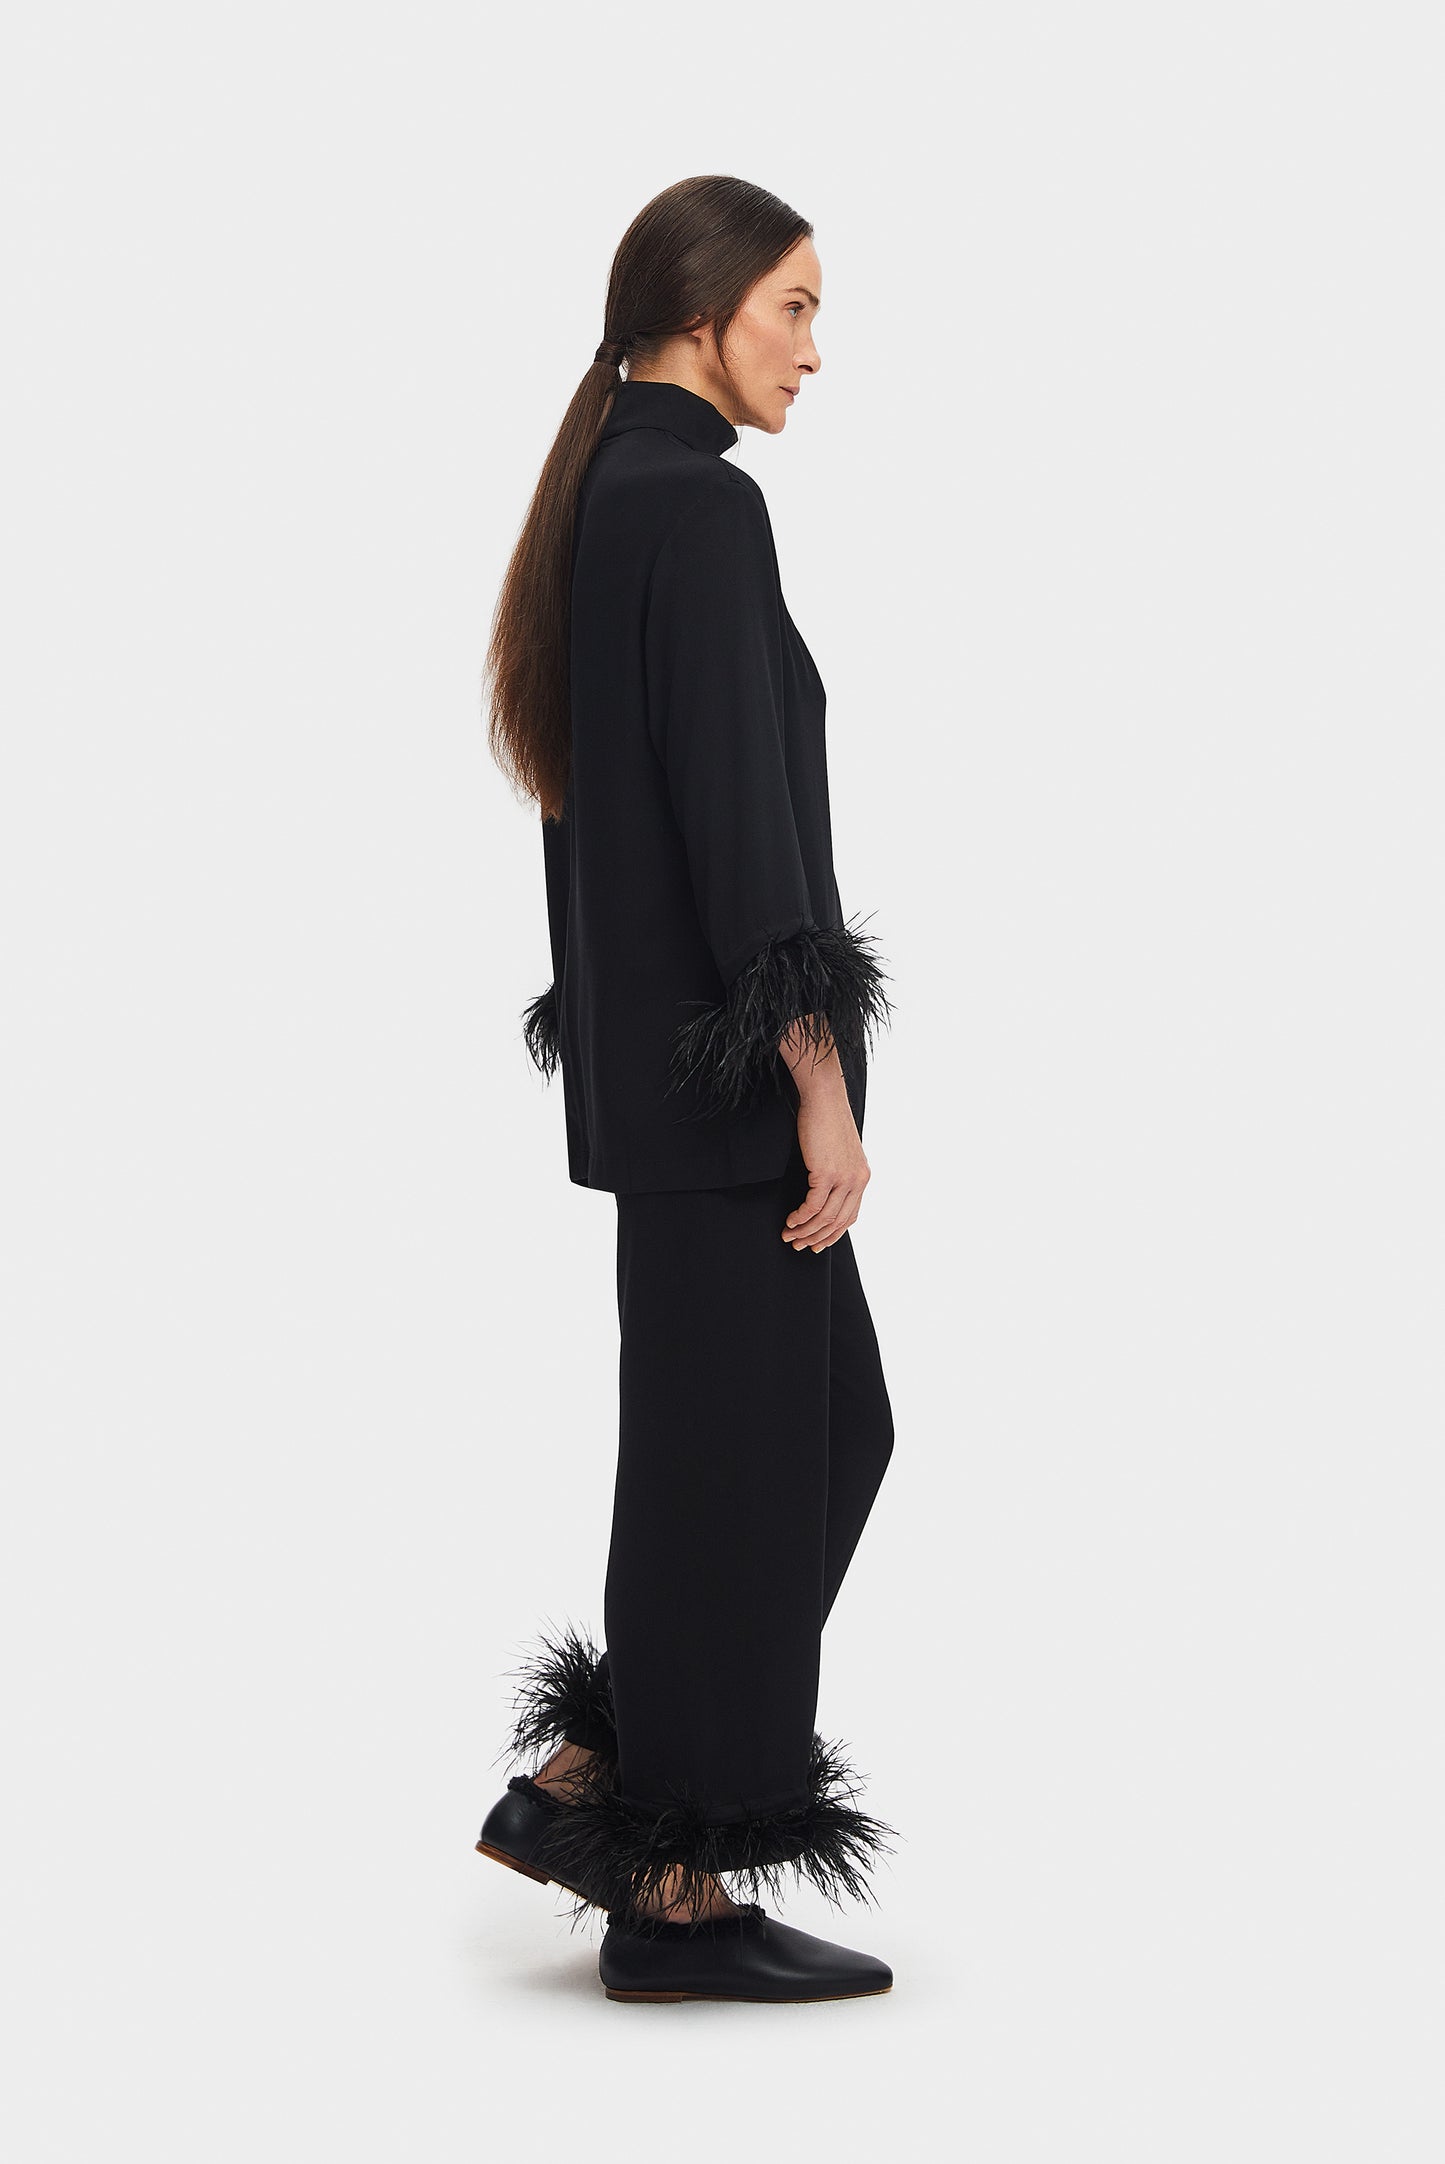 Black Tie Pajama with Detachable Feathers in Black